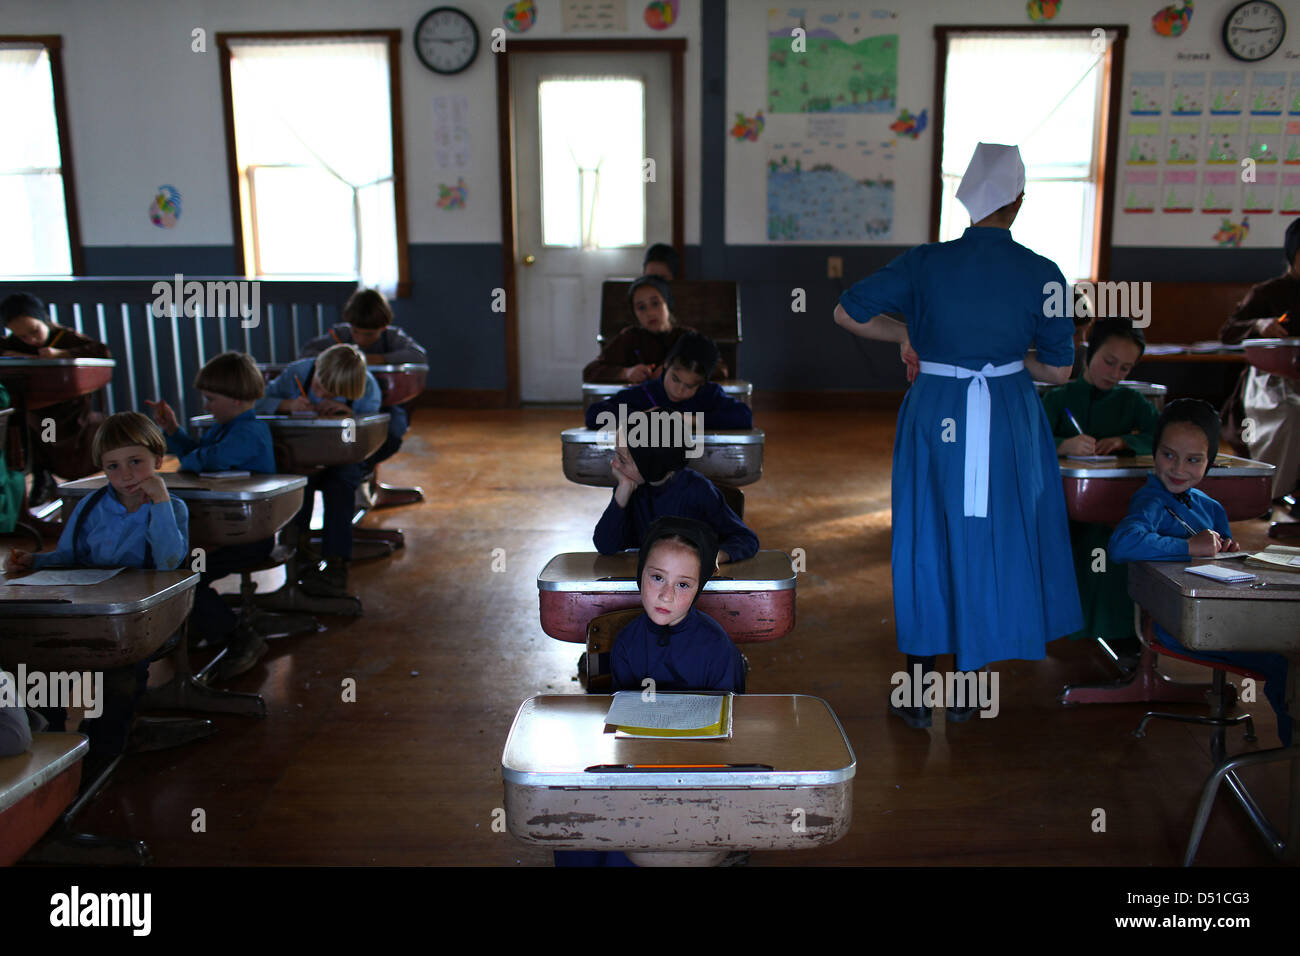 Dec 05, 2012 - Bergholz, Ohio, U.S. - (C) A young amish girls waits for her teacher to come by and check her work during school outside Bergholz, Ohio. (Credit Image: © Michael Francis McElroy/ZUMAPRESS.com) Stock Photo